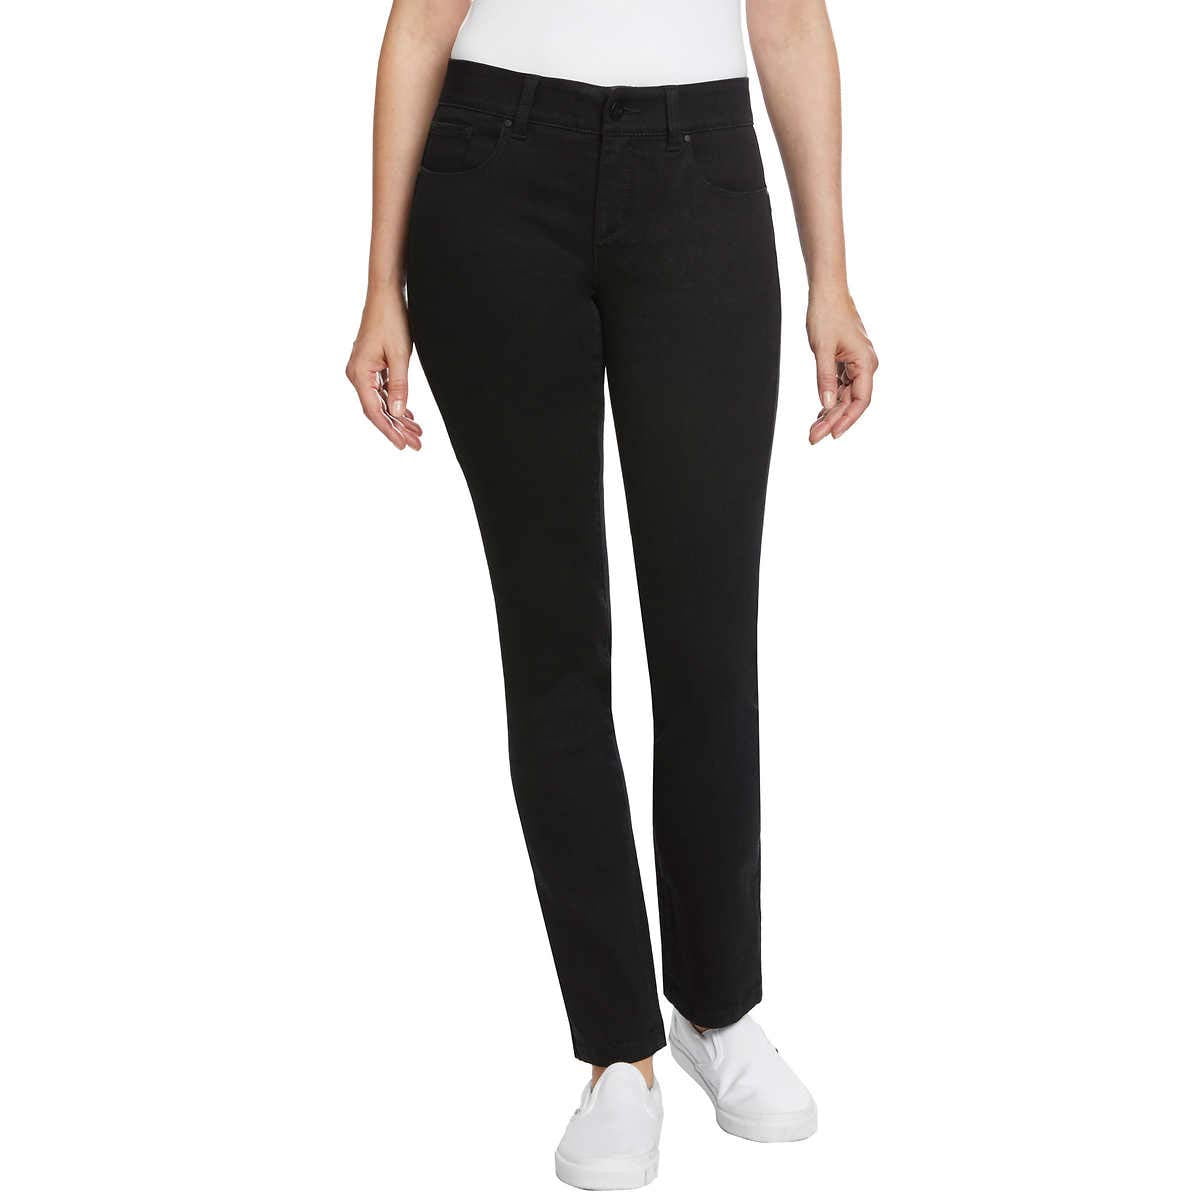 Jones New York Women's Lifts and Shapes Slim Flawless Fit Pants 4/27 ...